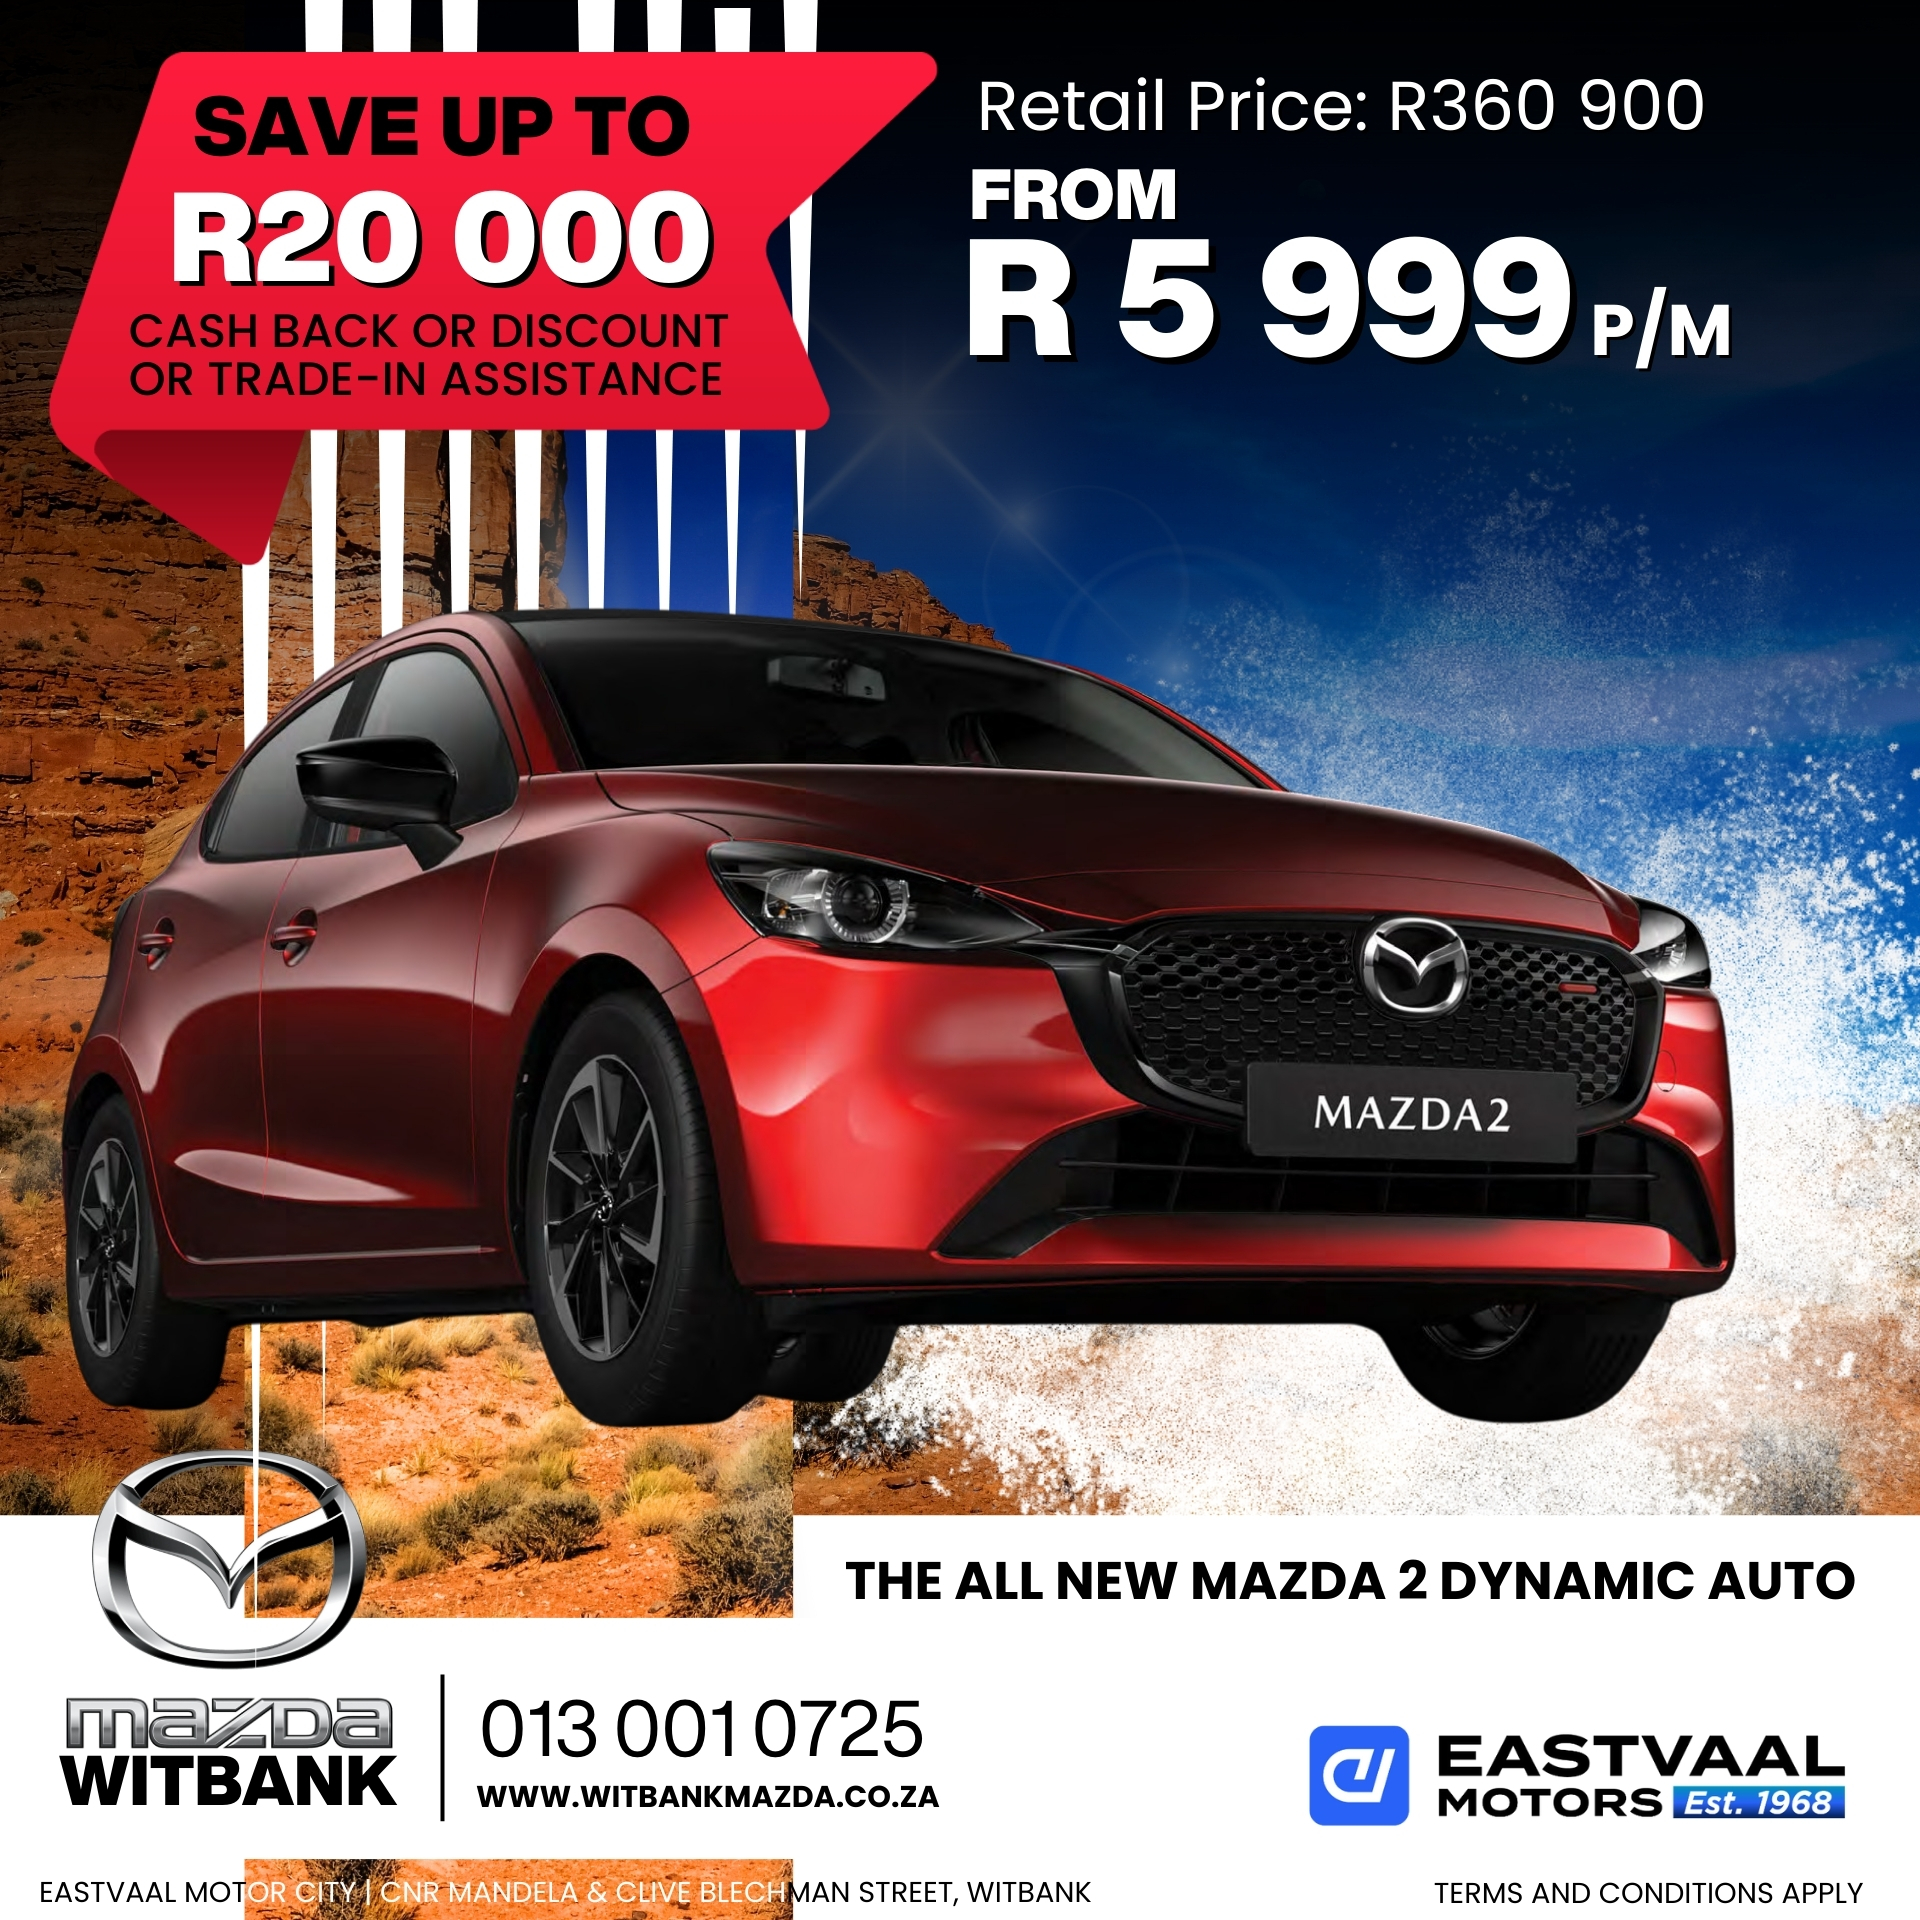 Drive into the future with a brand new Mazda this July! Visit Eastvaal Motor City and discover unbeatable deals. image from 